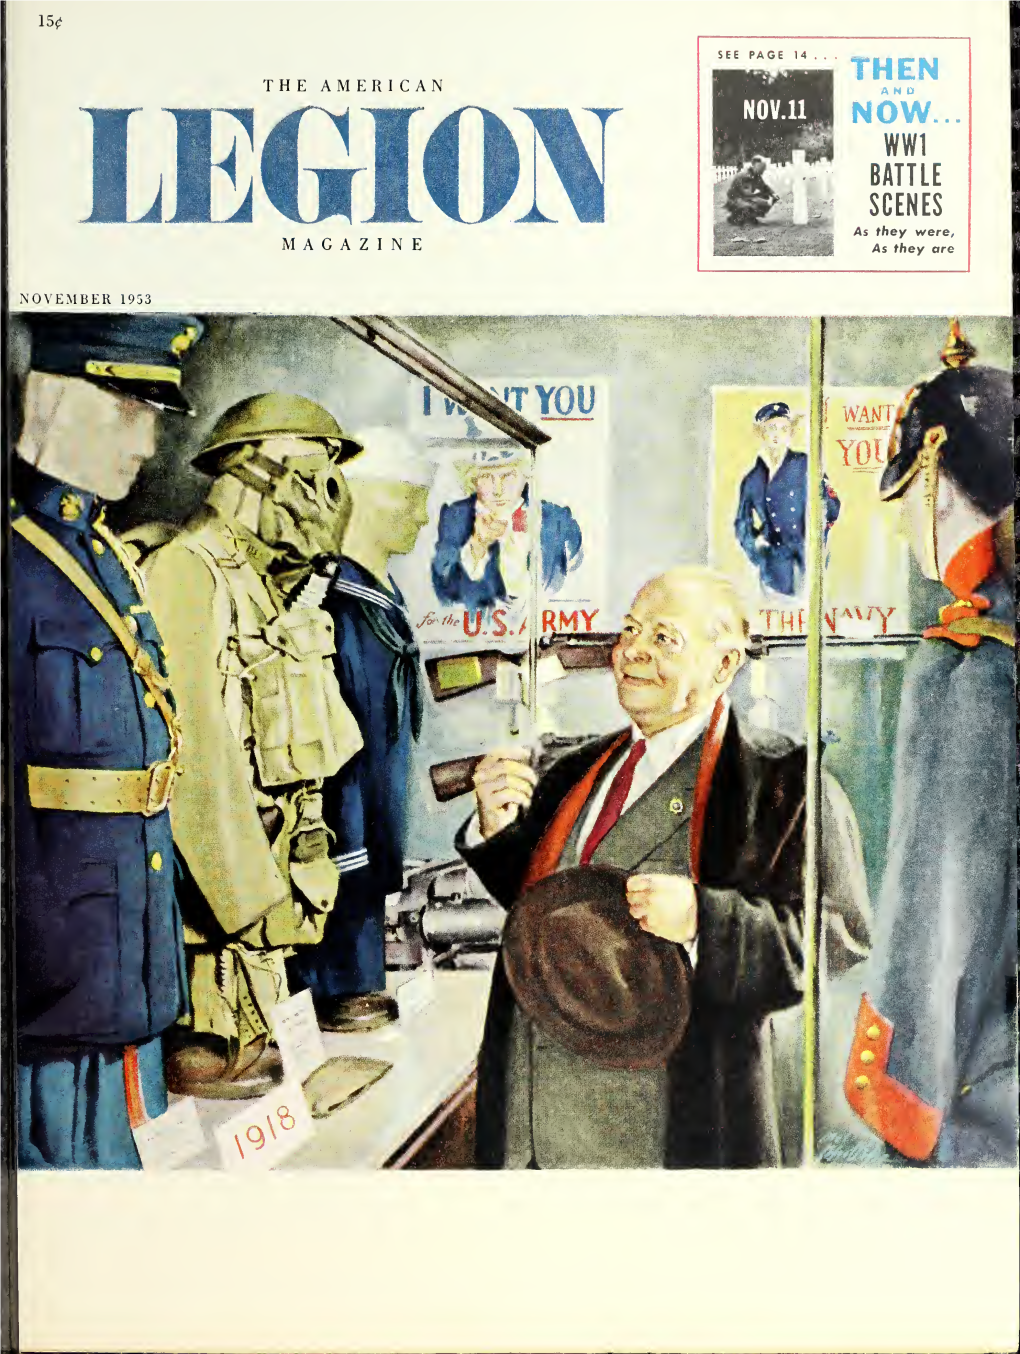 The American Legion Magazine Is the Official Publtcotion of the American Legion and Is